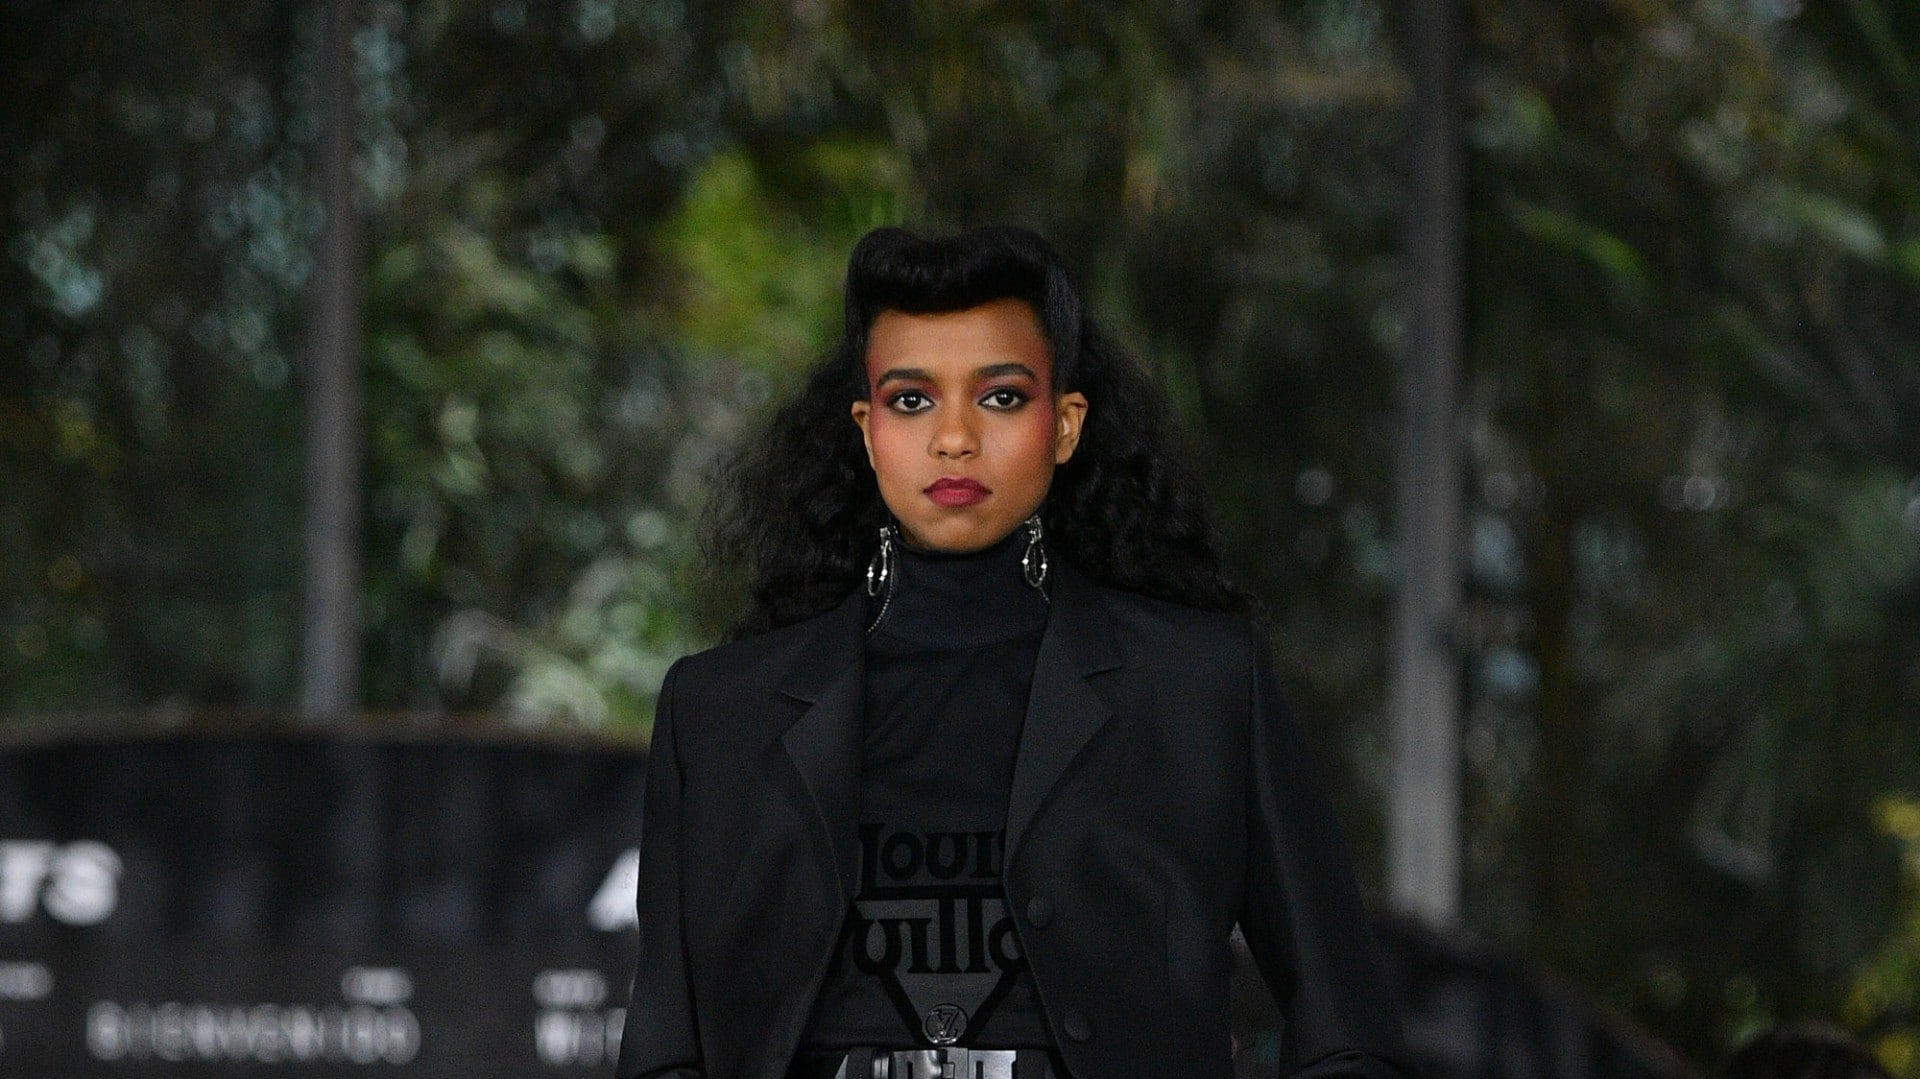 It's All About The 80s For Louis Vuitton's Resort 2020 Runway Beauty